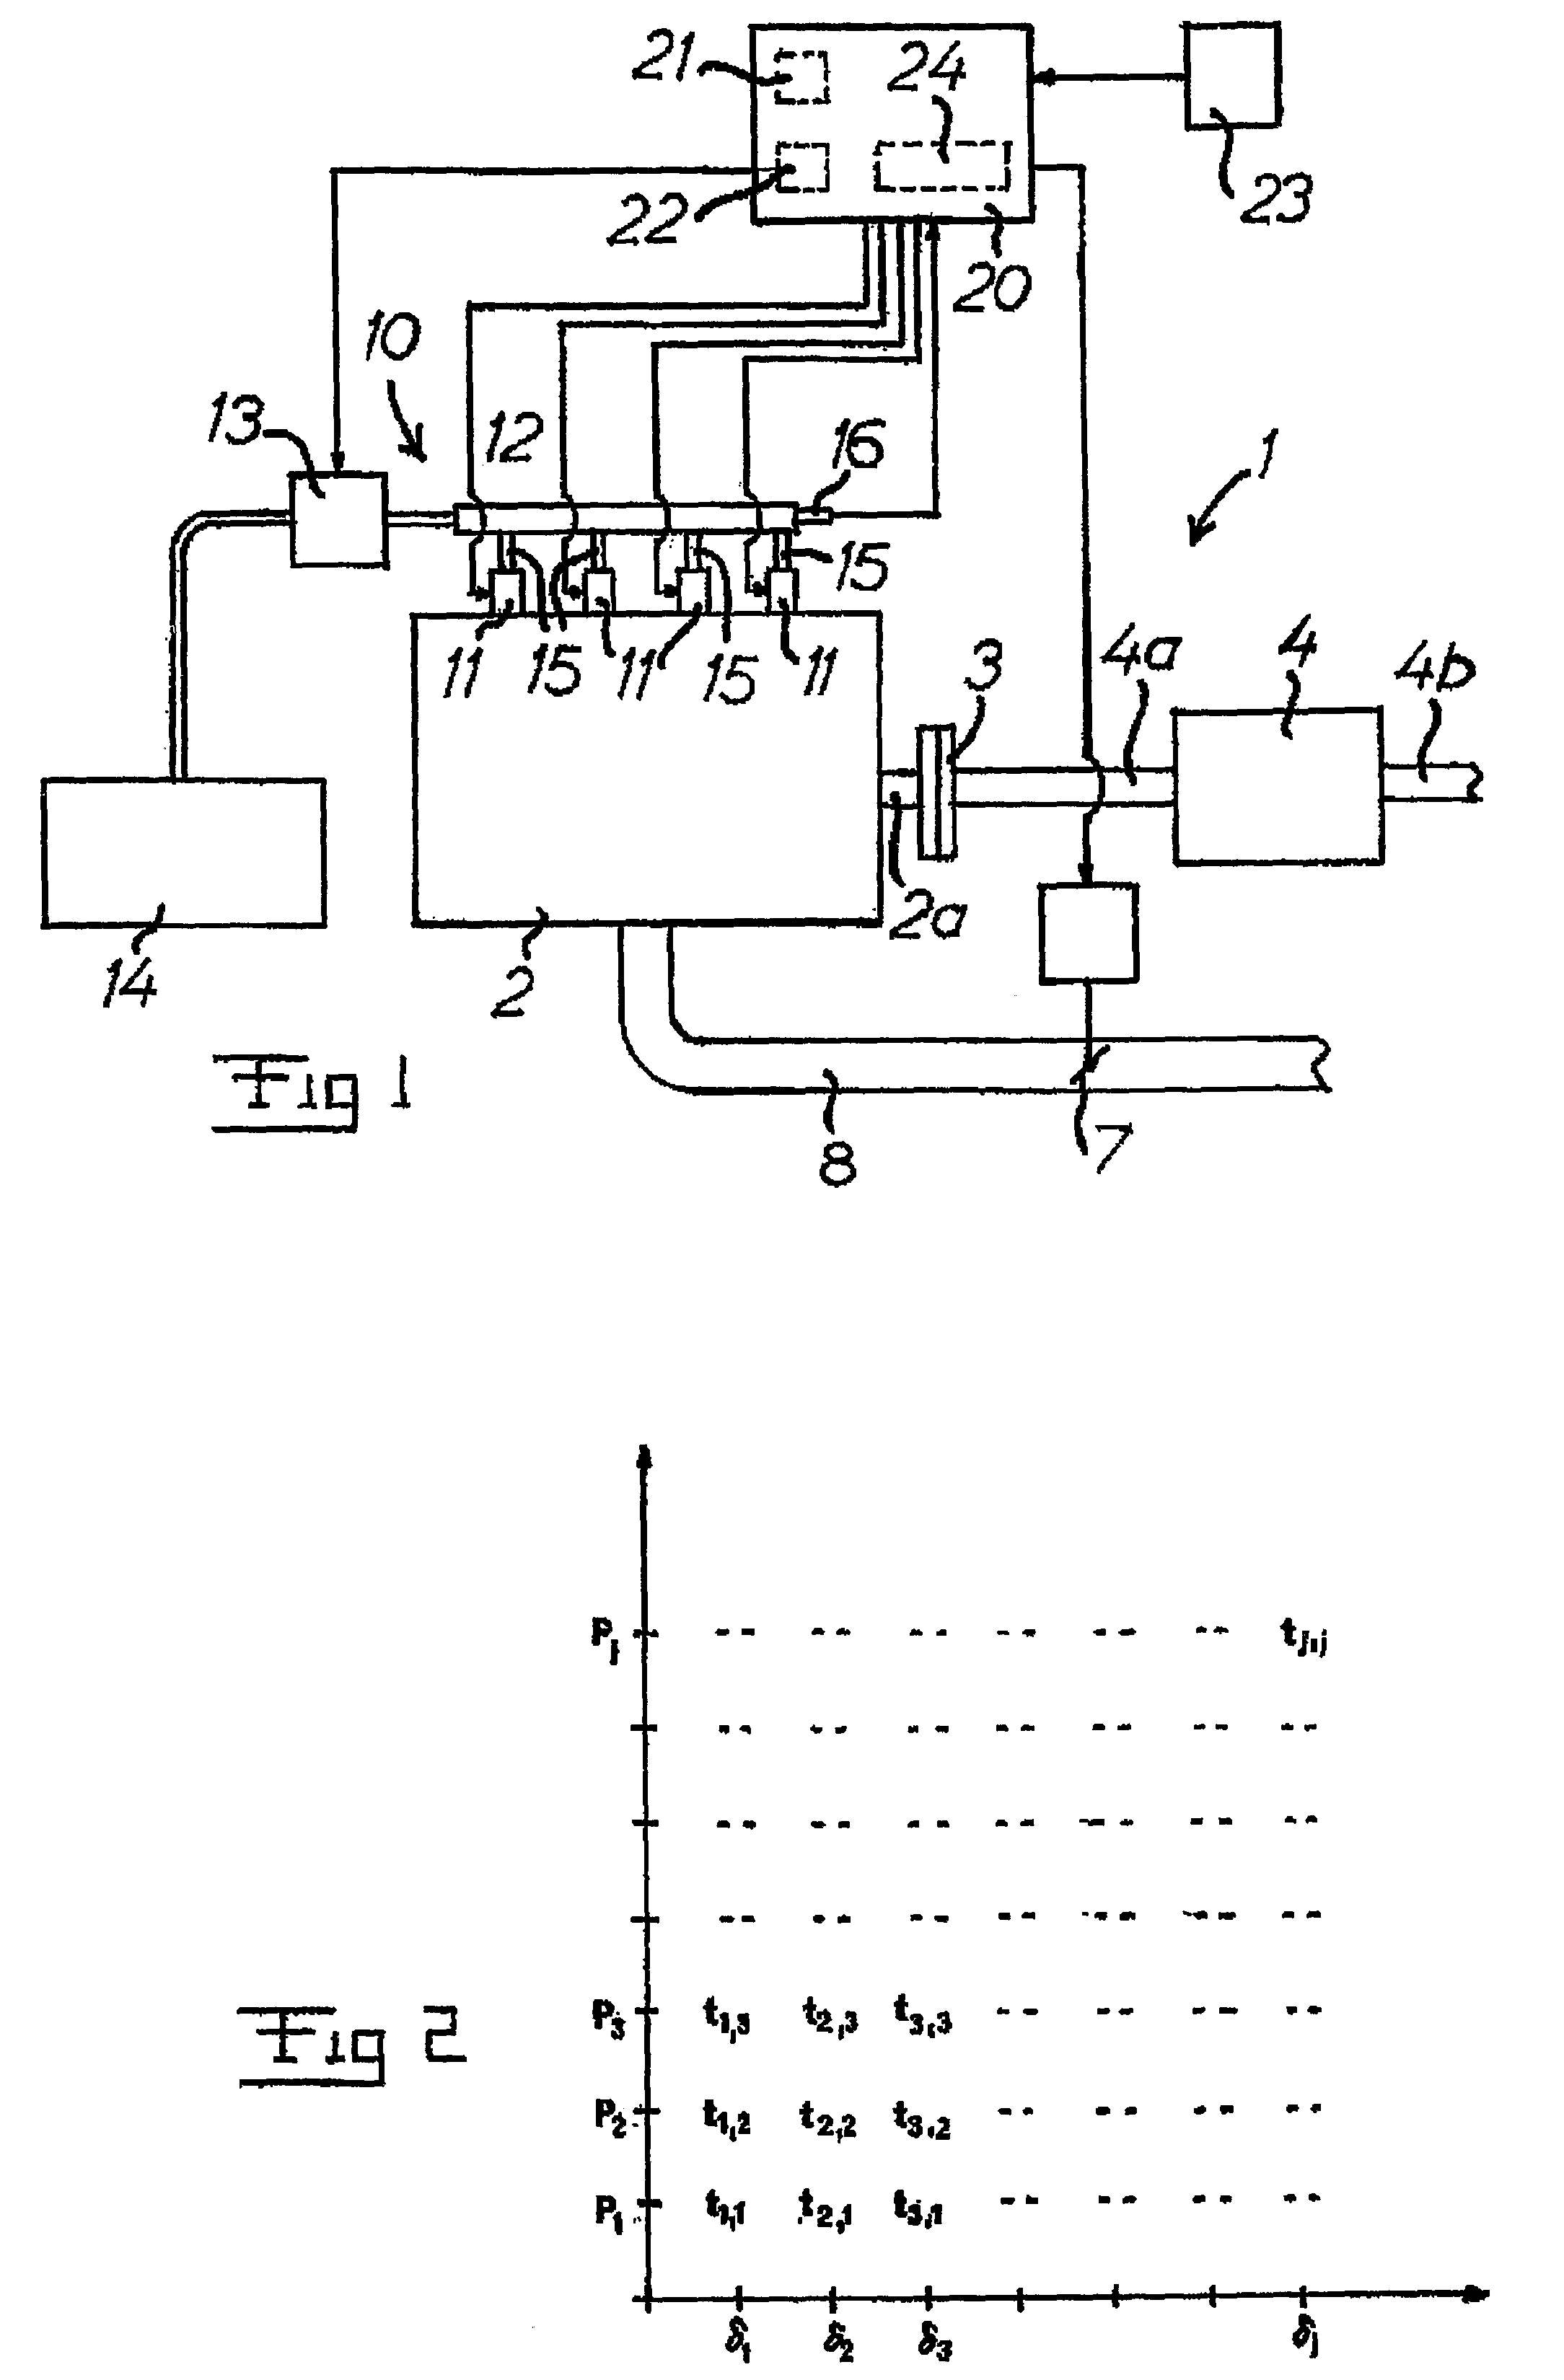 Method for adjusting a lookup table and a system for controlling an injector of a cylinder in a combustion engine